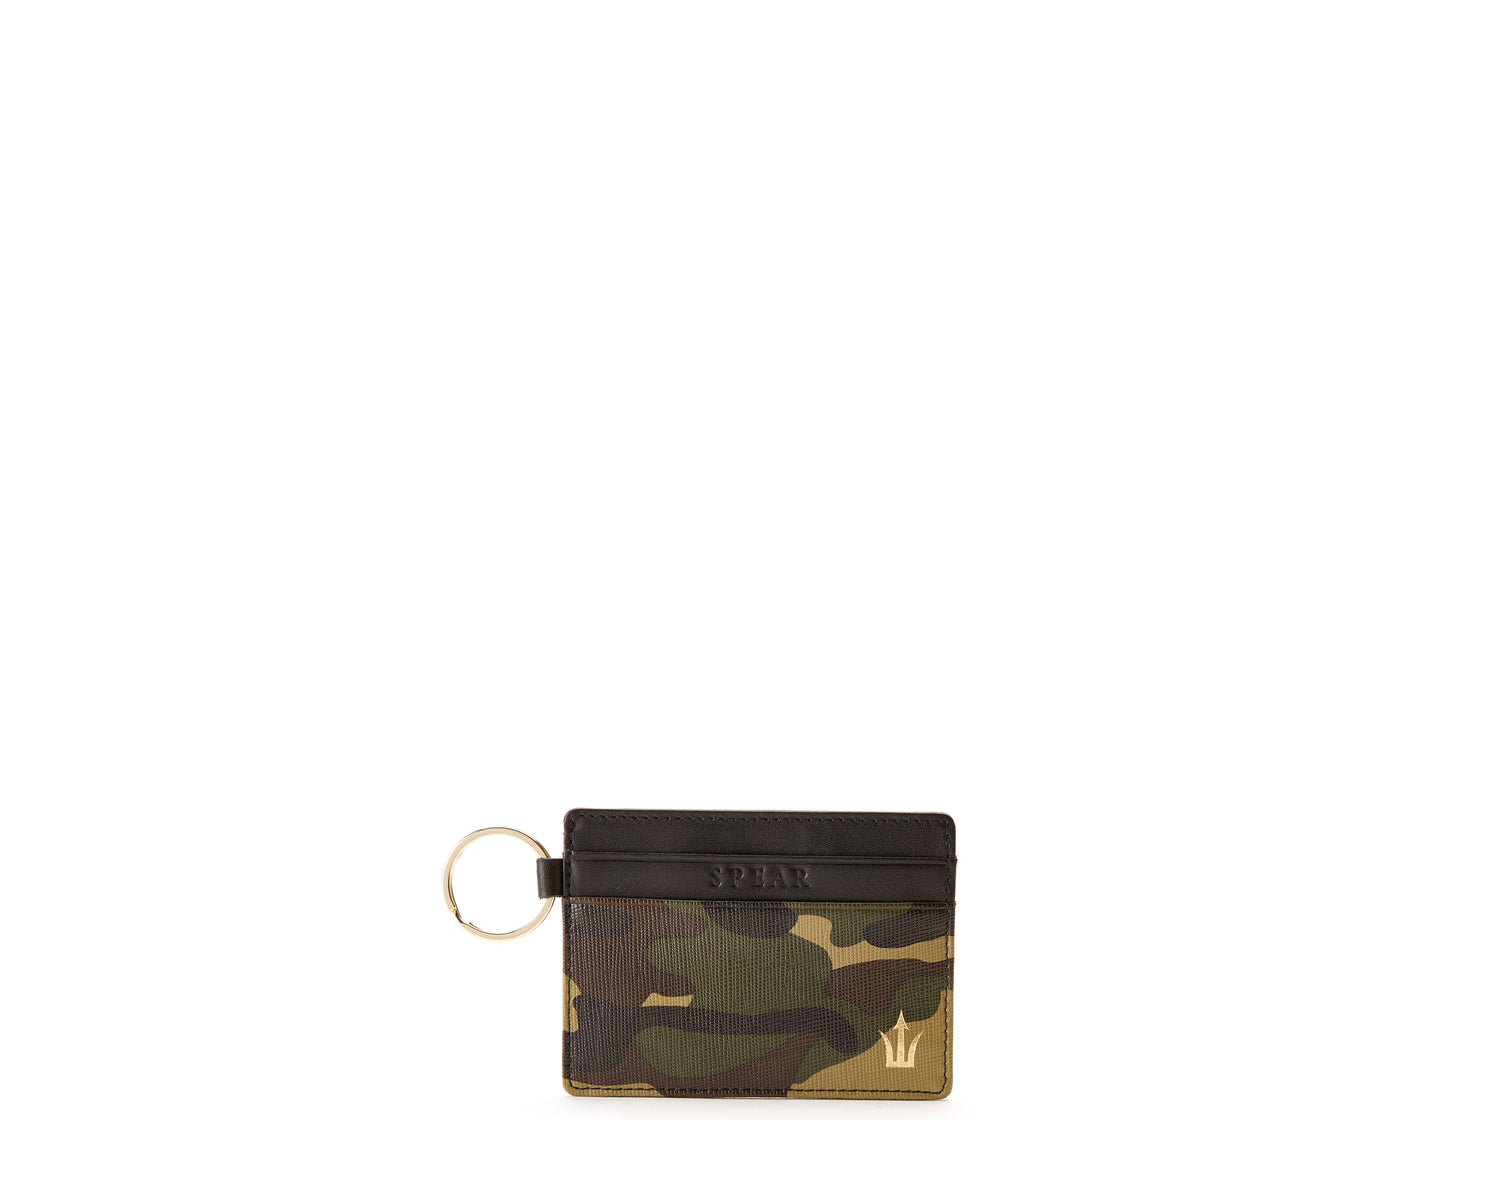 Spear Consul Card Holder with Gold Ring